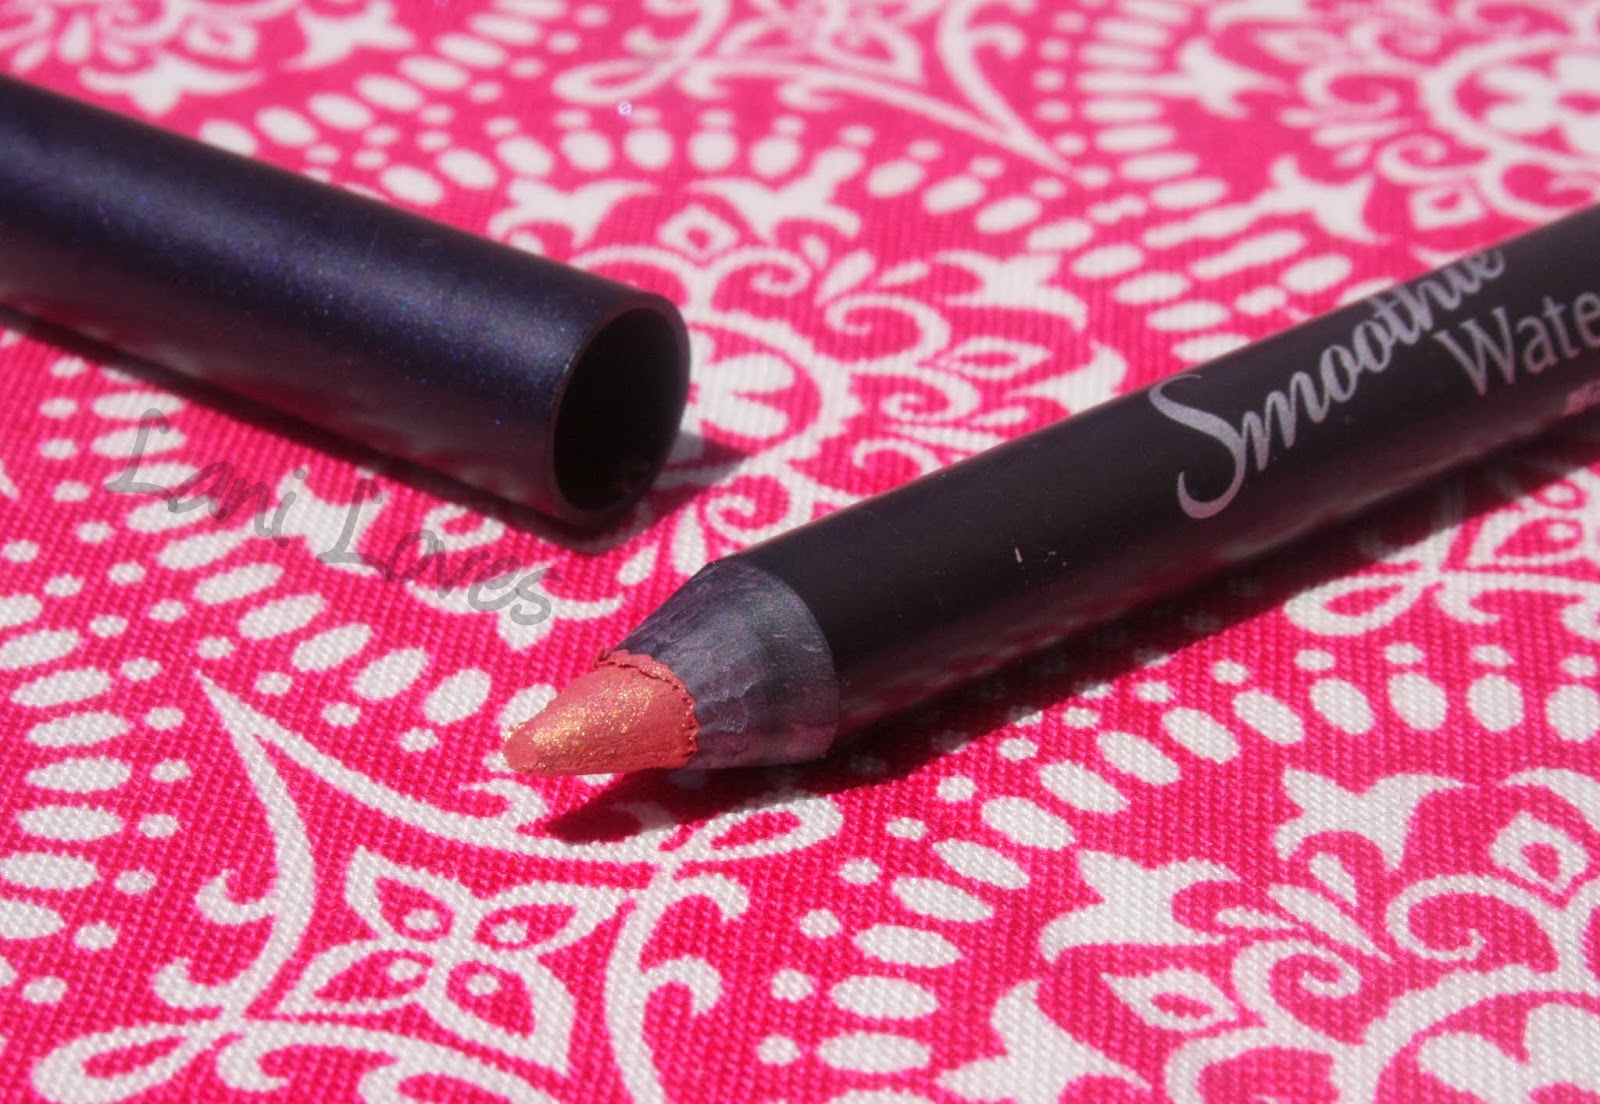 Peripera Smoothie Waterproof Pencil Liner #8 Golden Peach Swatches & Review